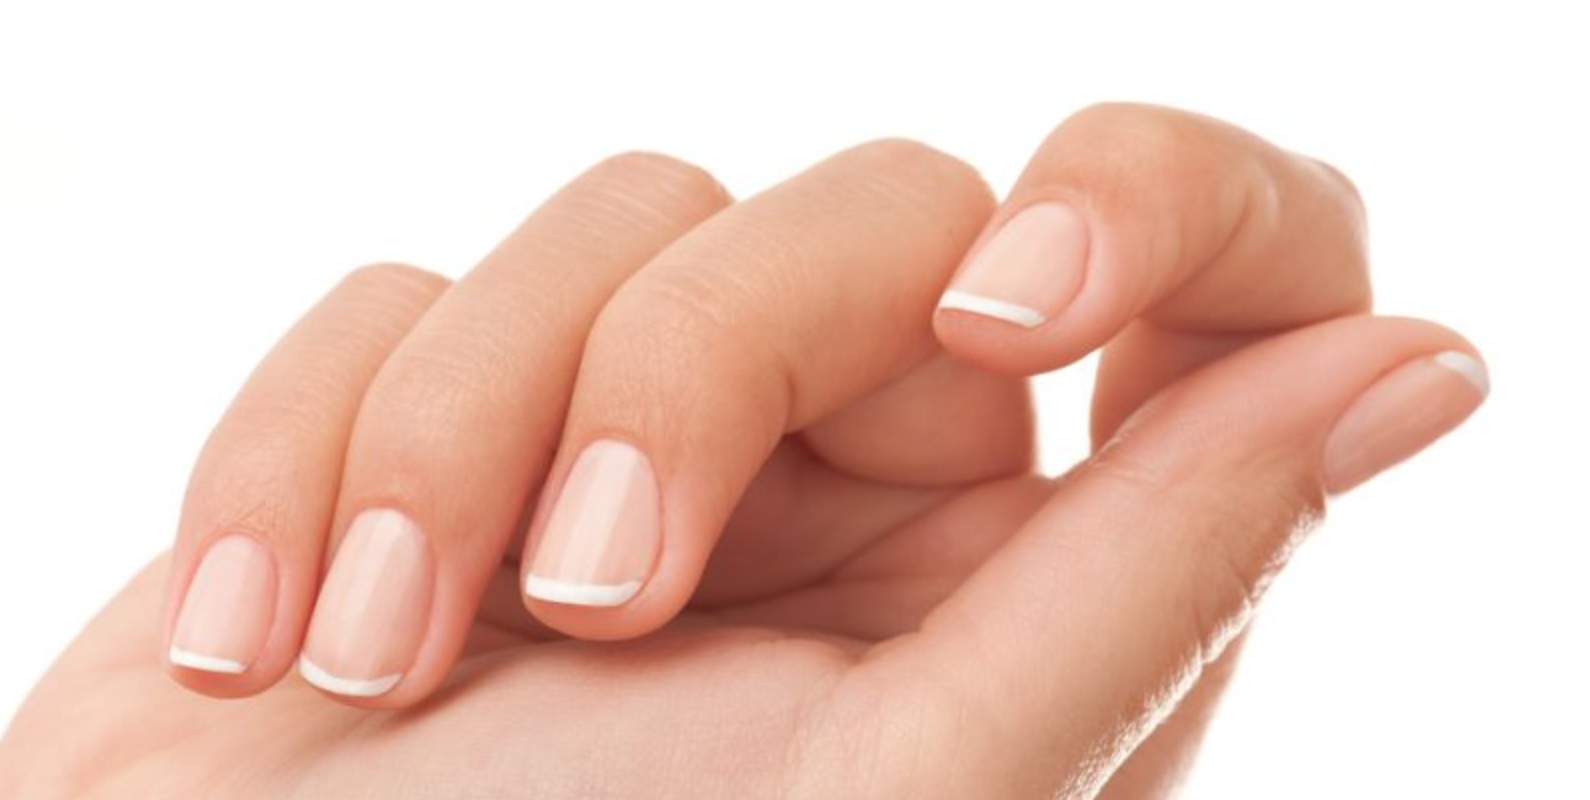 The Best Vitamin for Healthy Nails